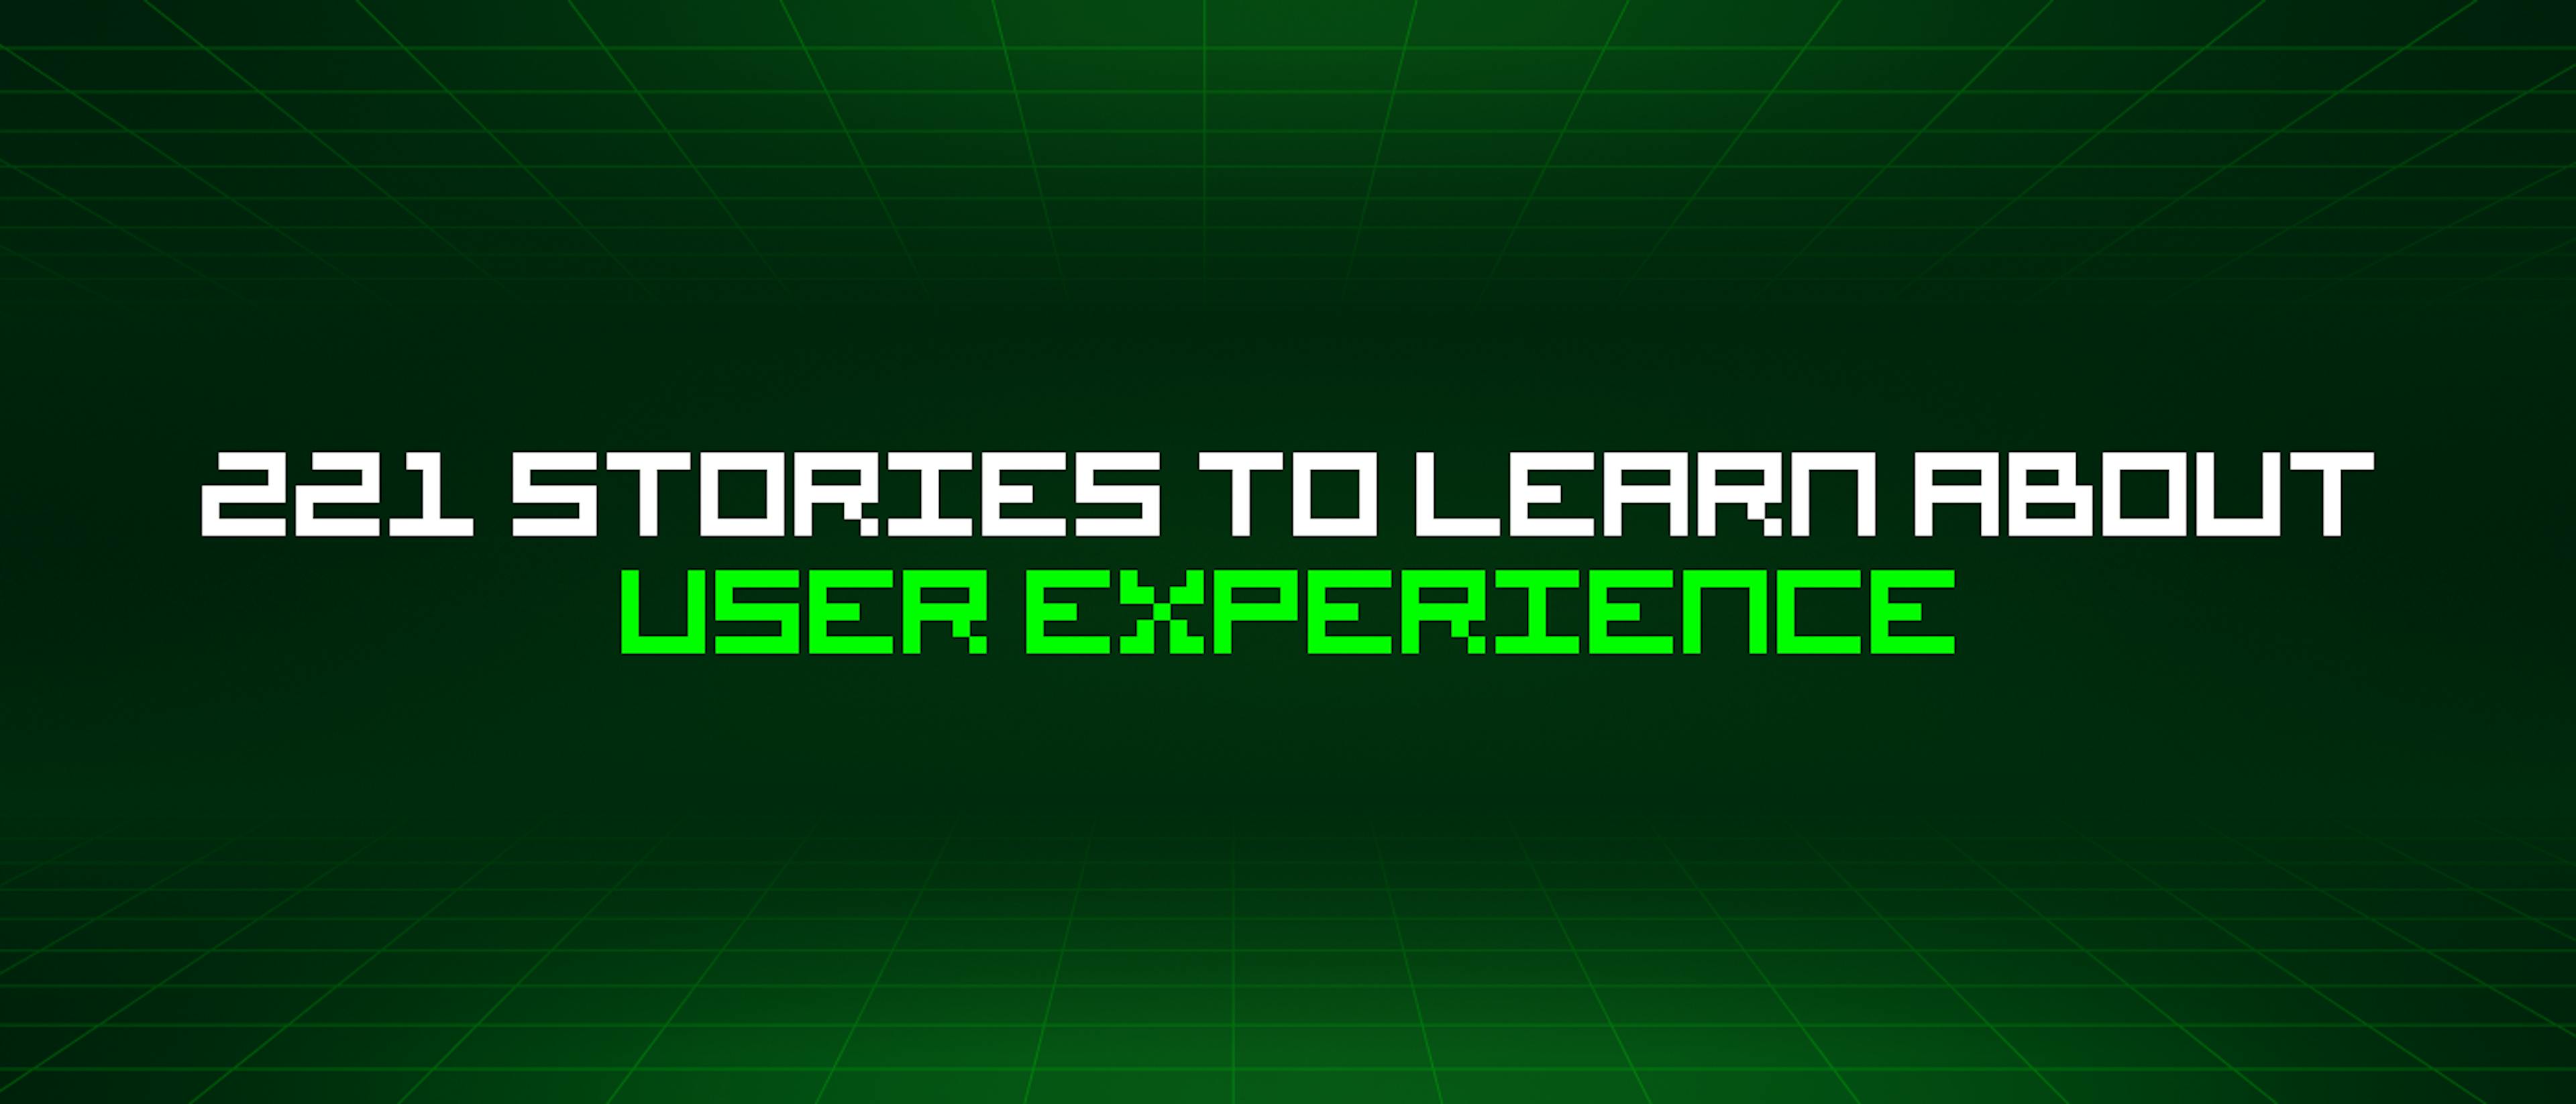 featured image - 221 Stories To Learn About User Experience